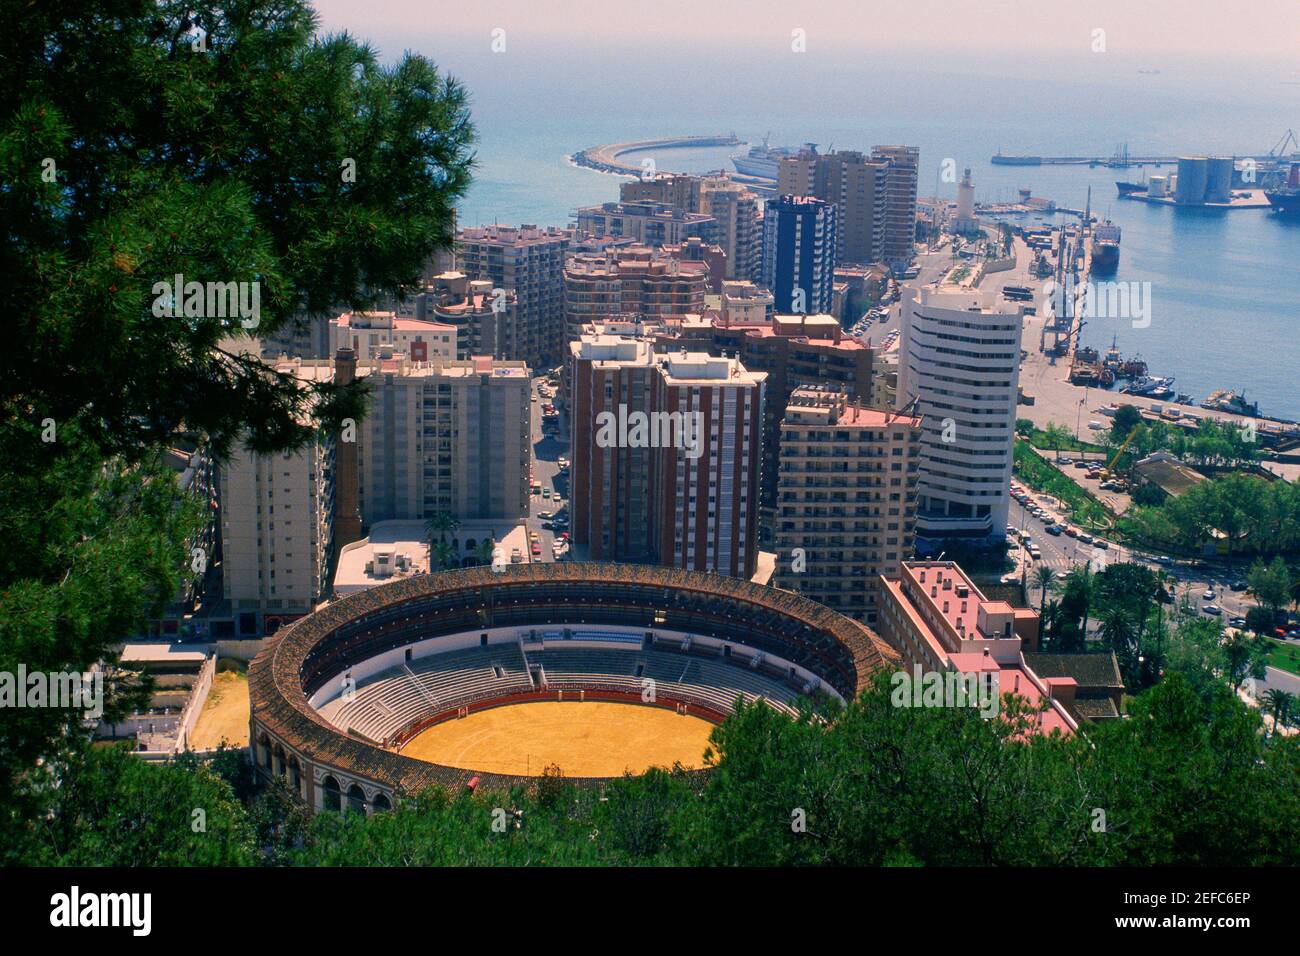 High angle view of a bullring in the city, Malaga, Andalusia, Spain Stock Photo